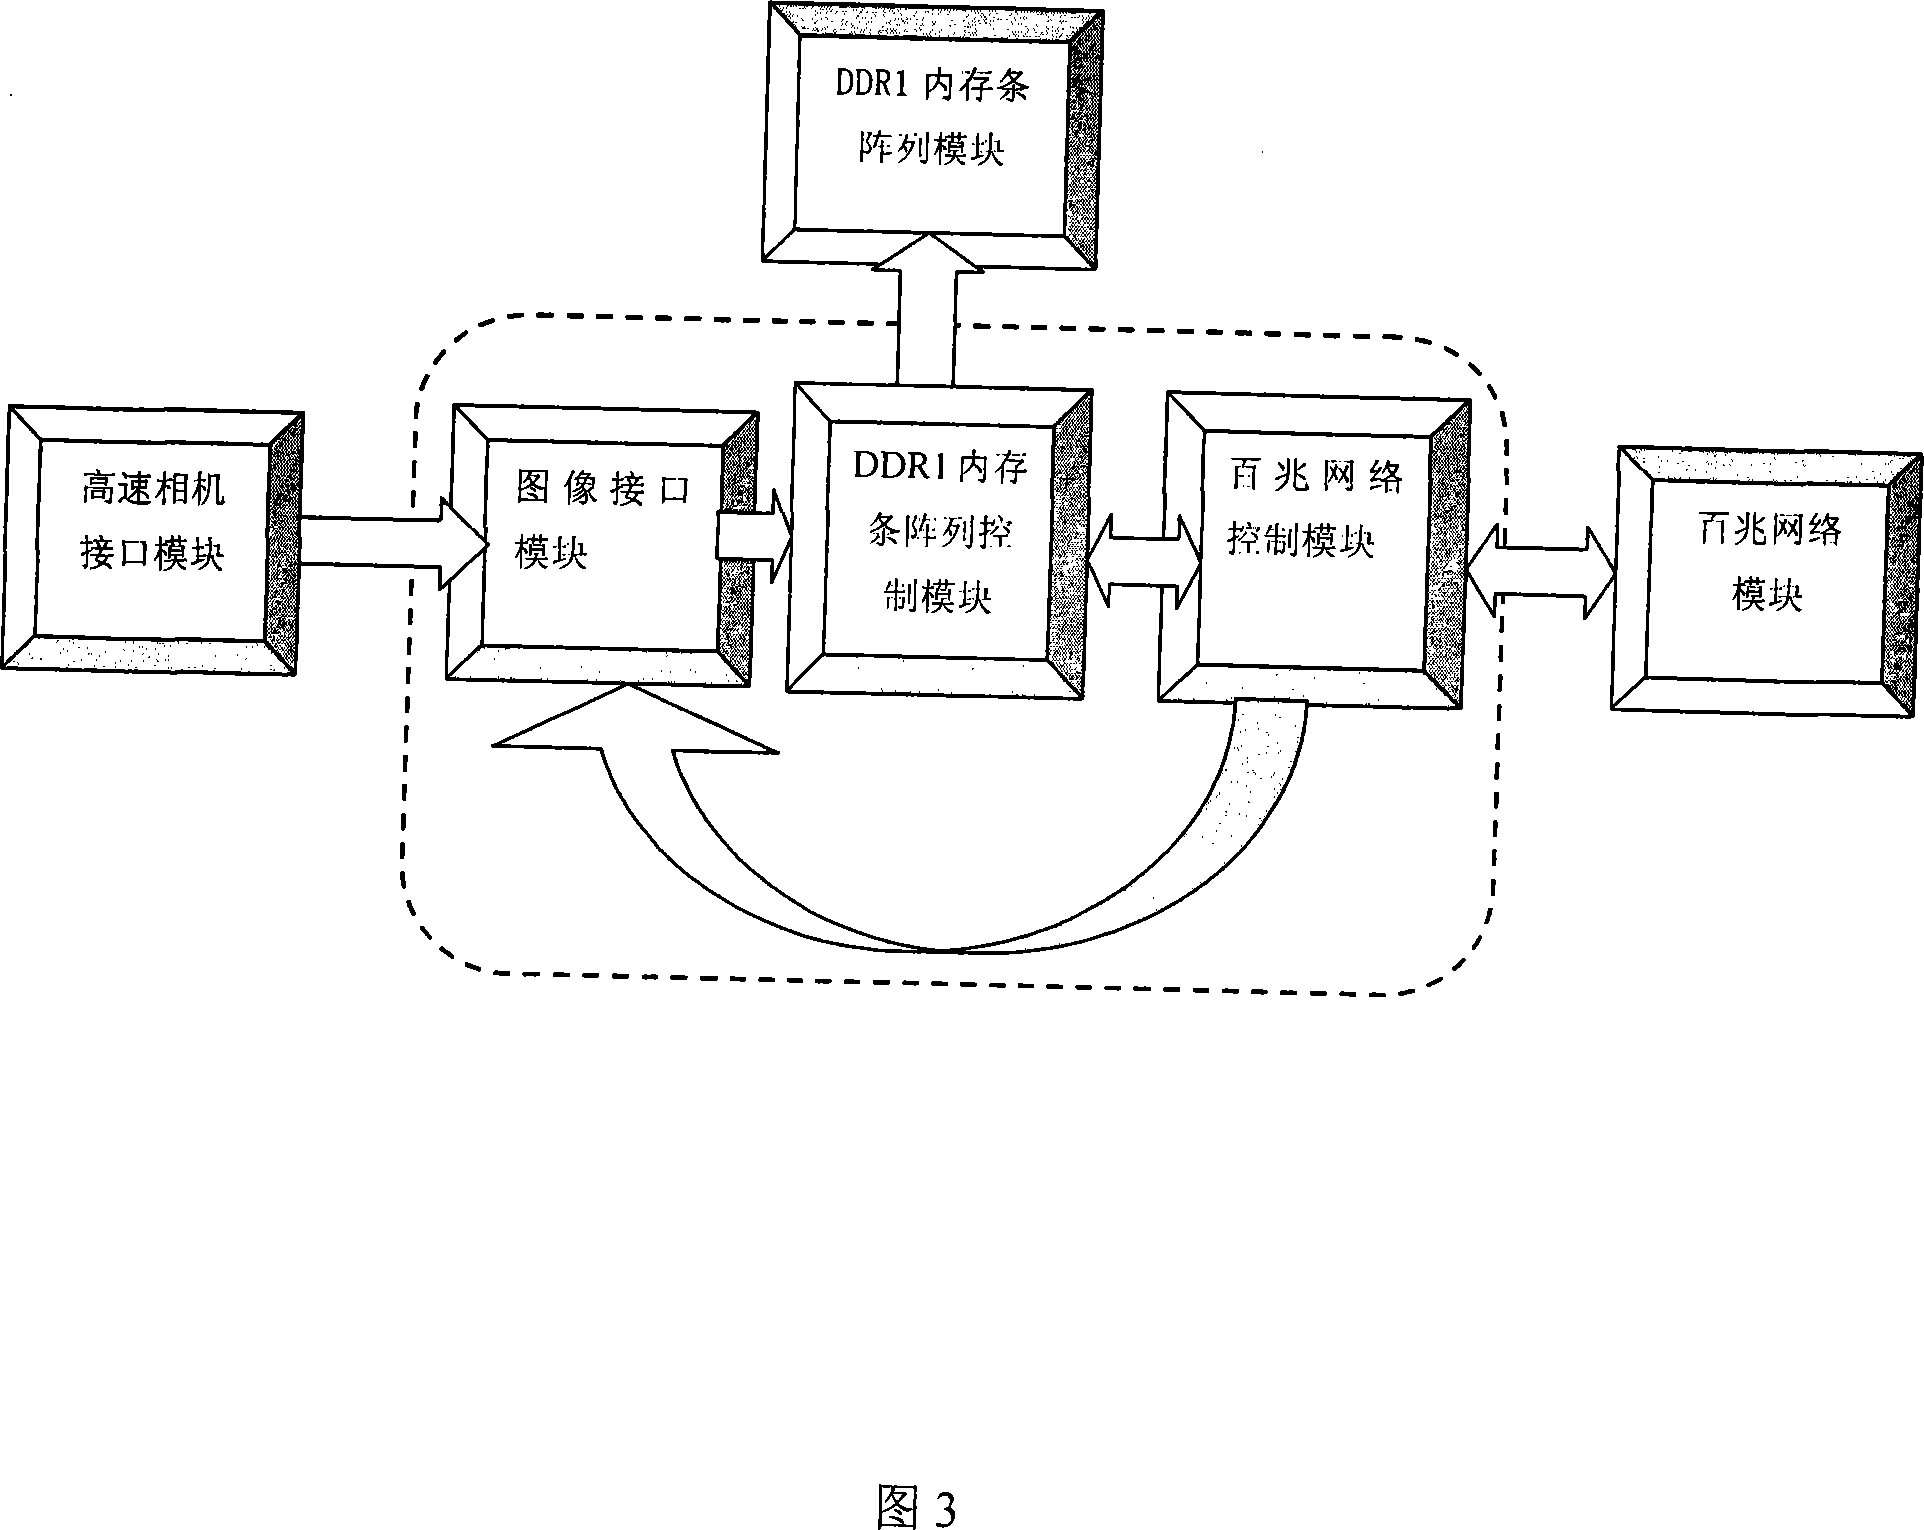 High speed image recording method based on memory array